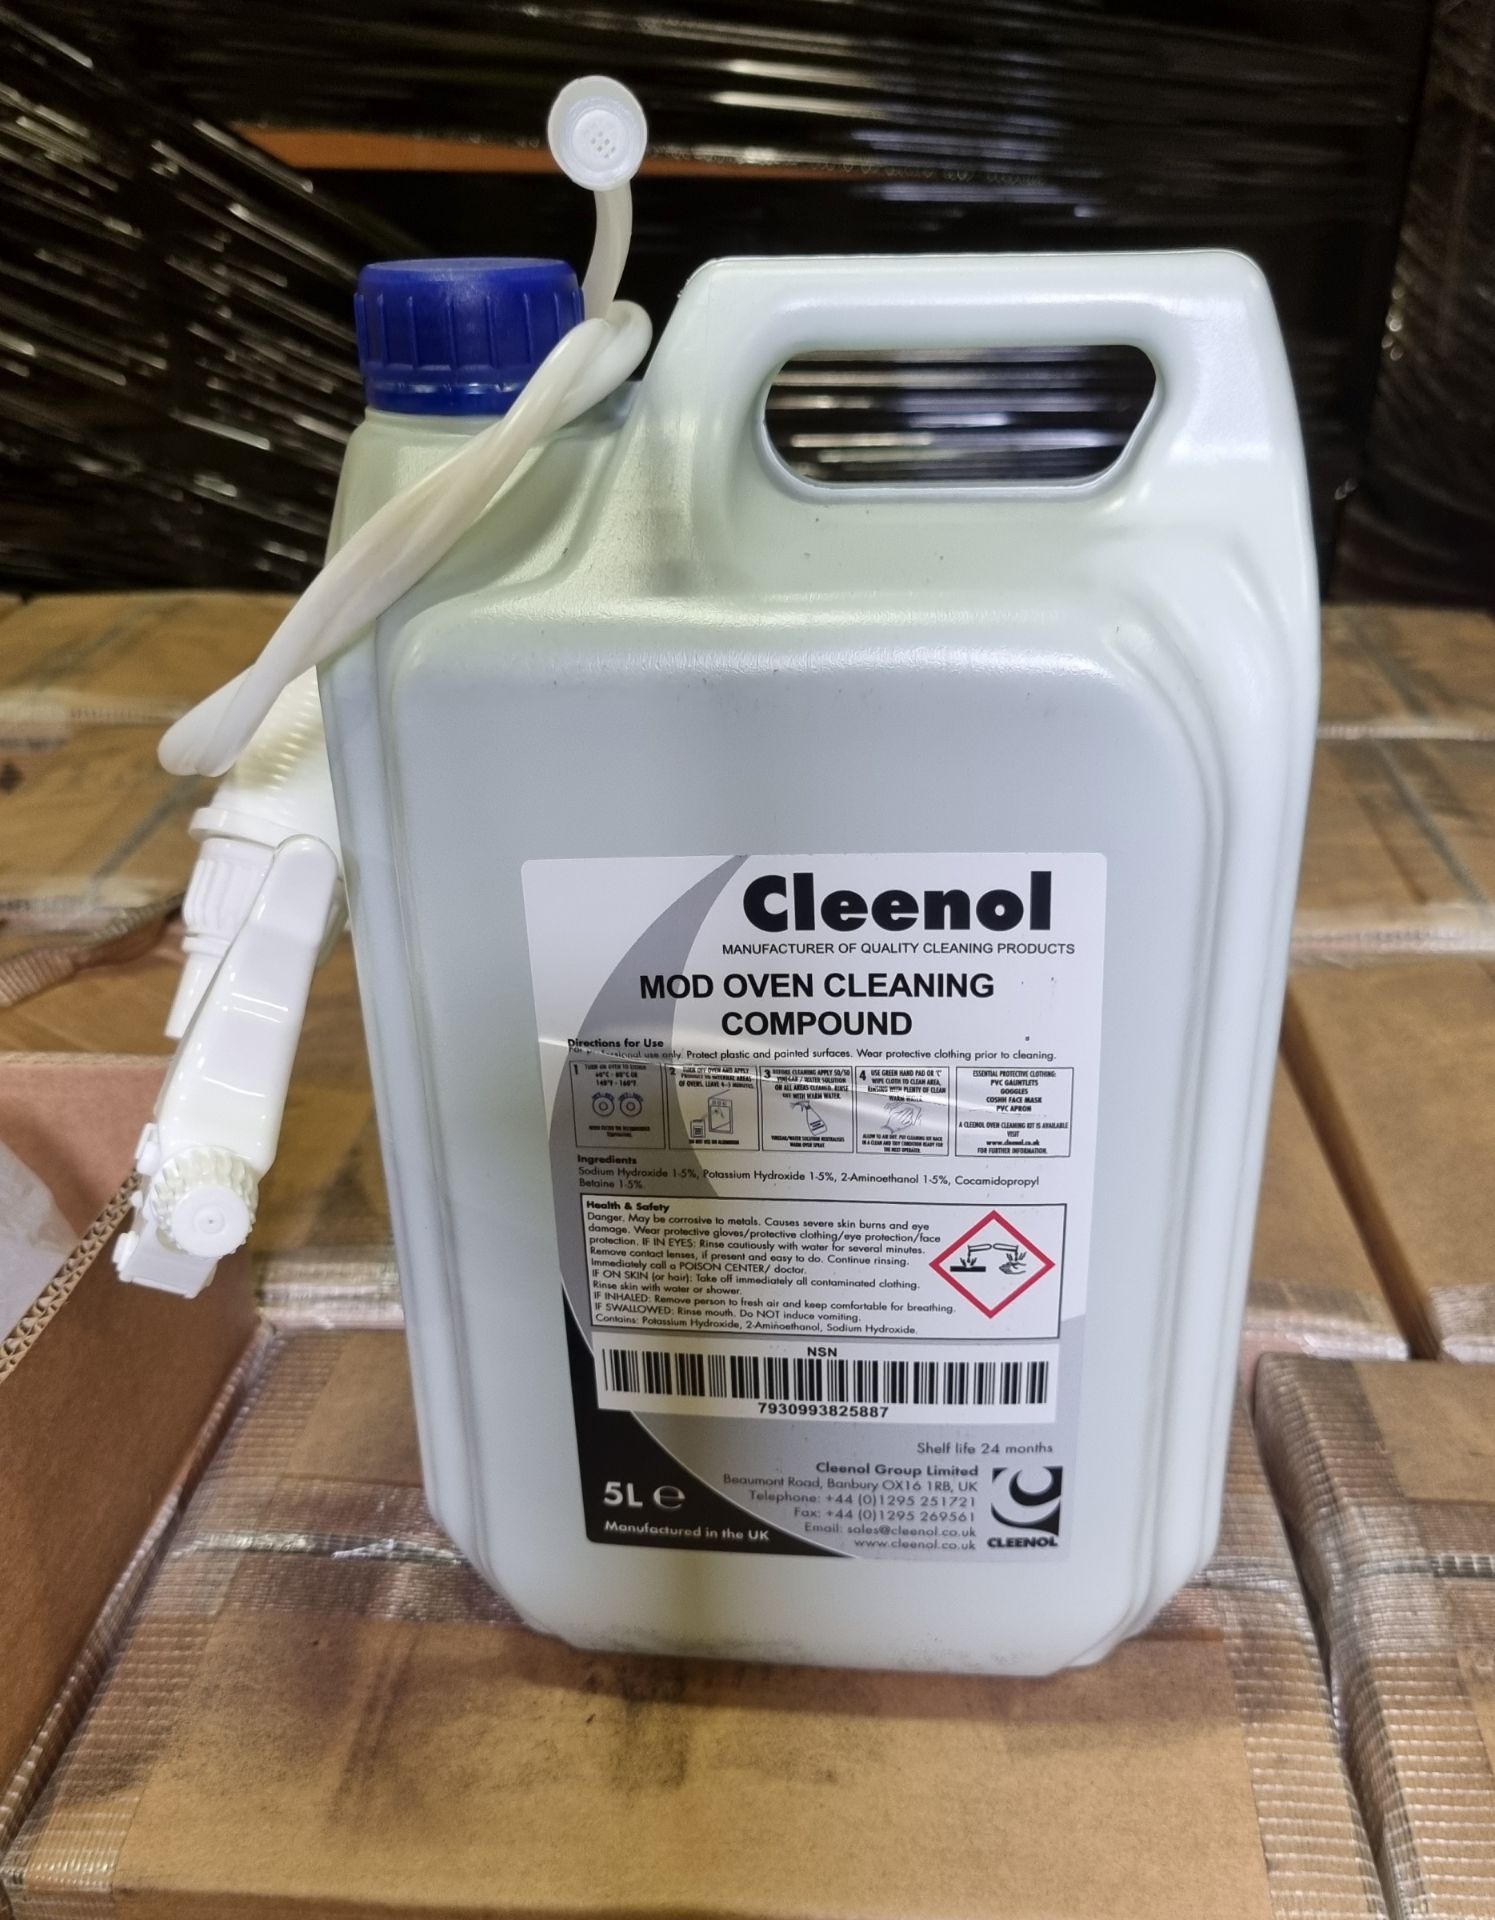 20x boxes of Cleenol Group oven cleaning compound - 5L bottle - 2 bottles per box - Image 3 of 5